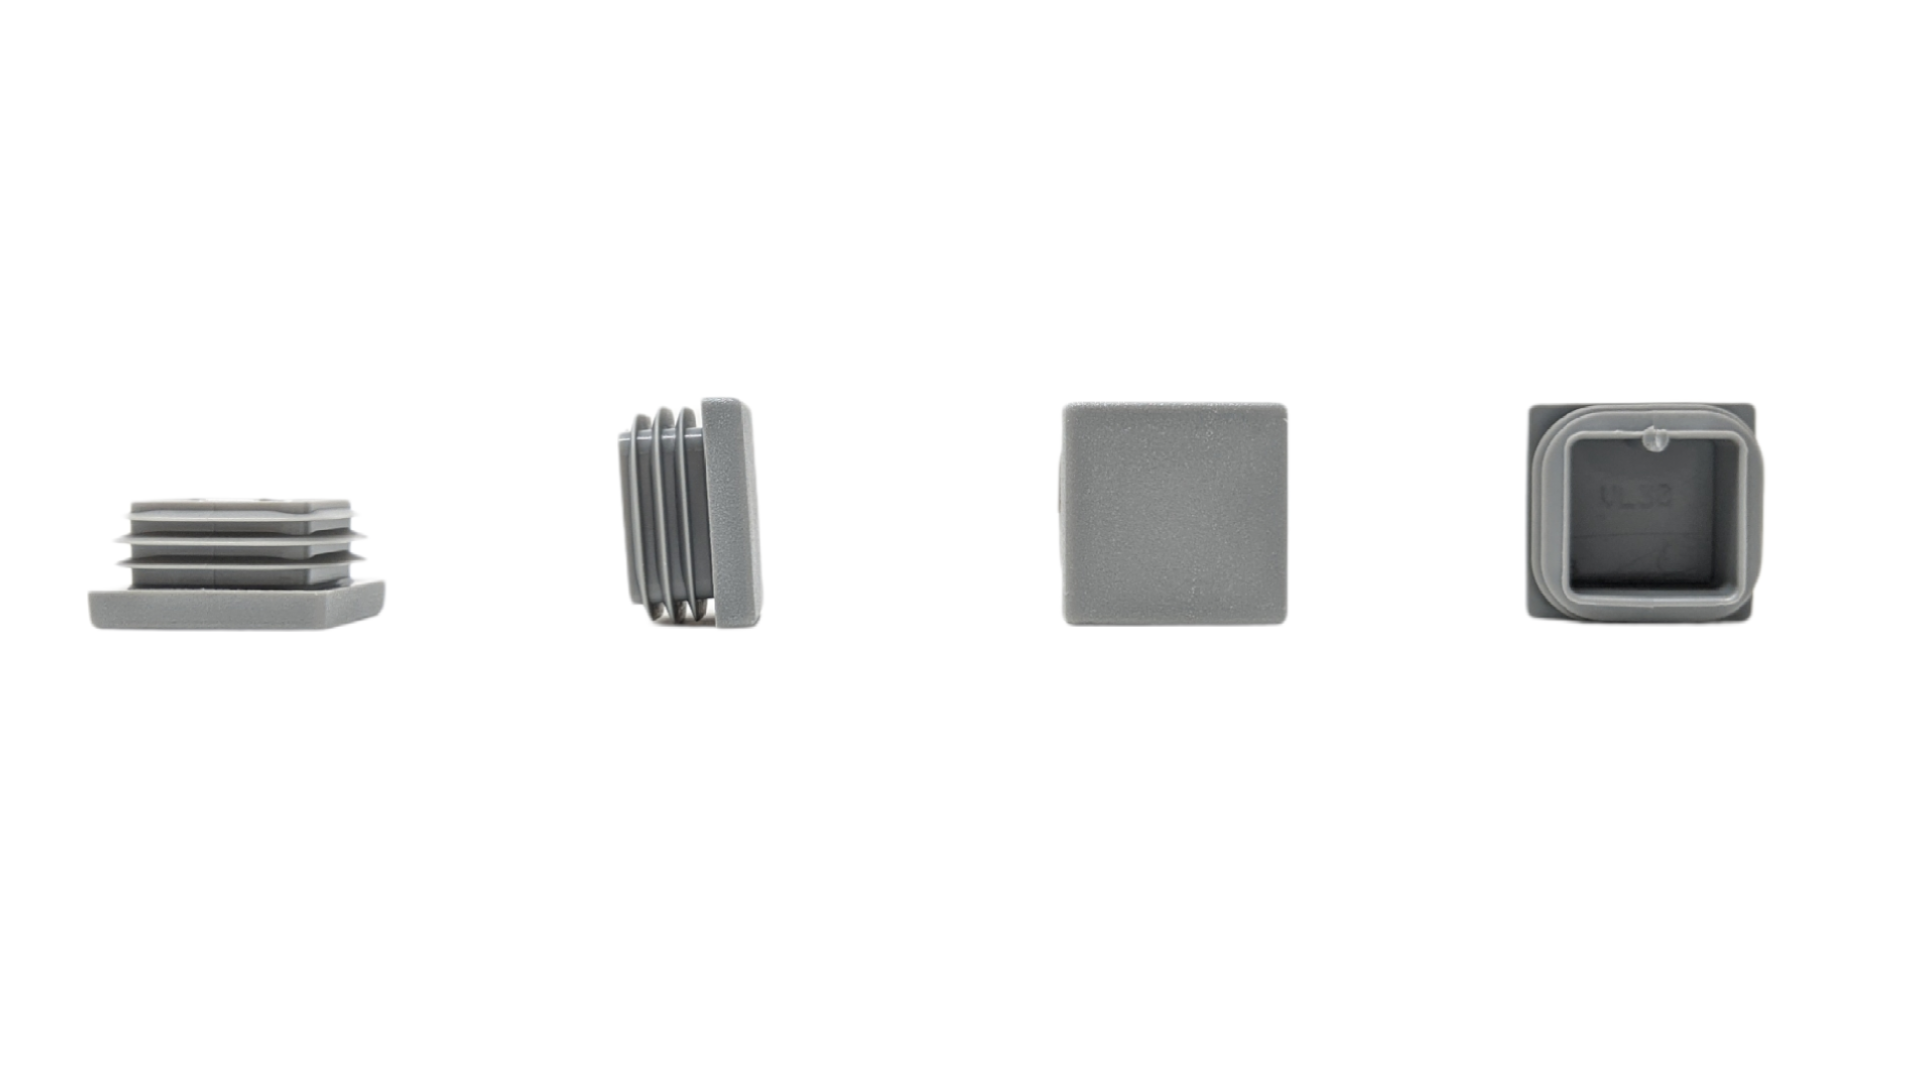 Square Tube Inserts 30mm x 30mm Grey | Made in Germany | Keay Vital Parts - Keay Vital Parts